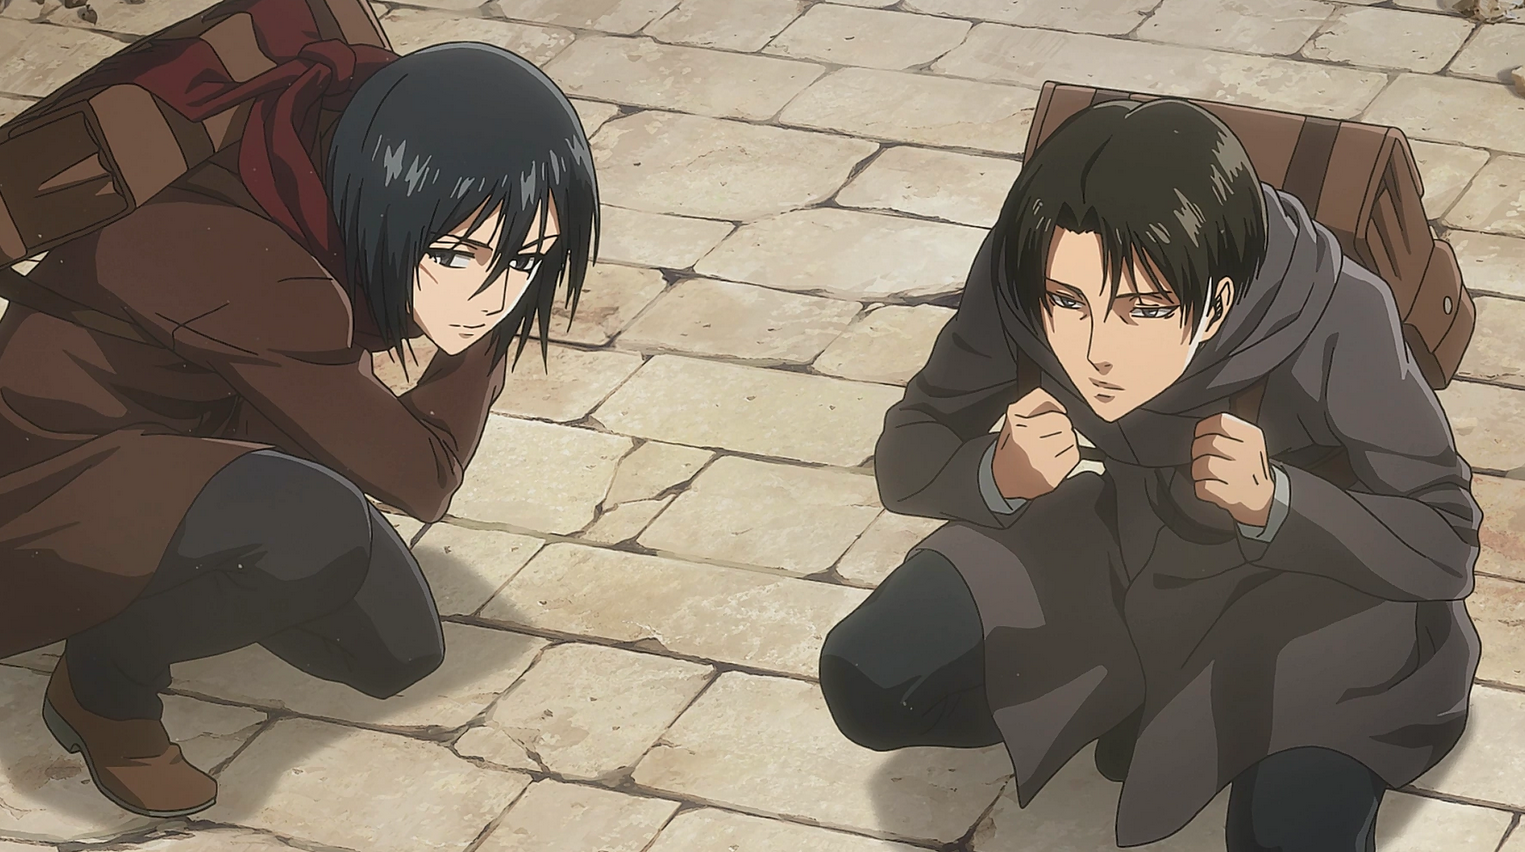 Mikasa is the last descendant of the Ackerman clan renowned for their superhuman strength